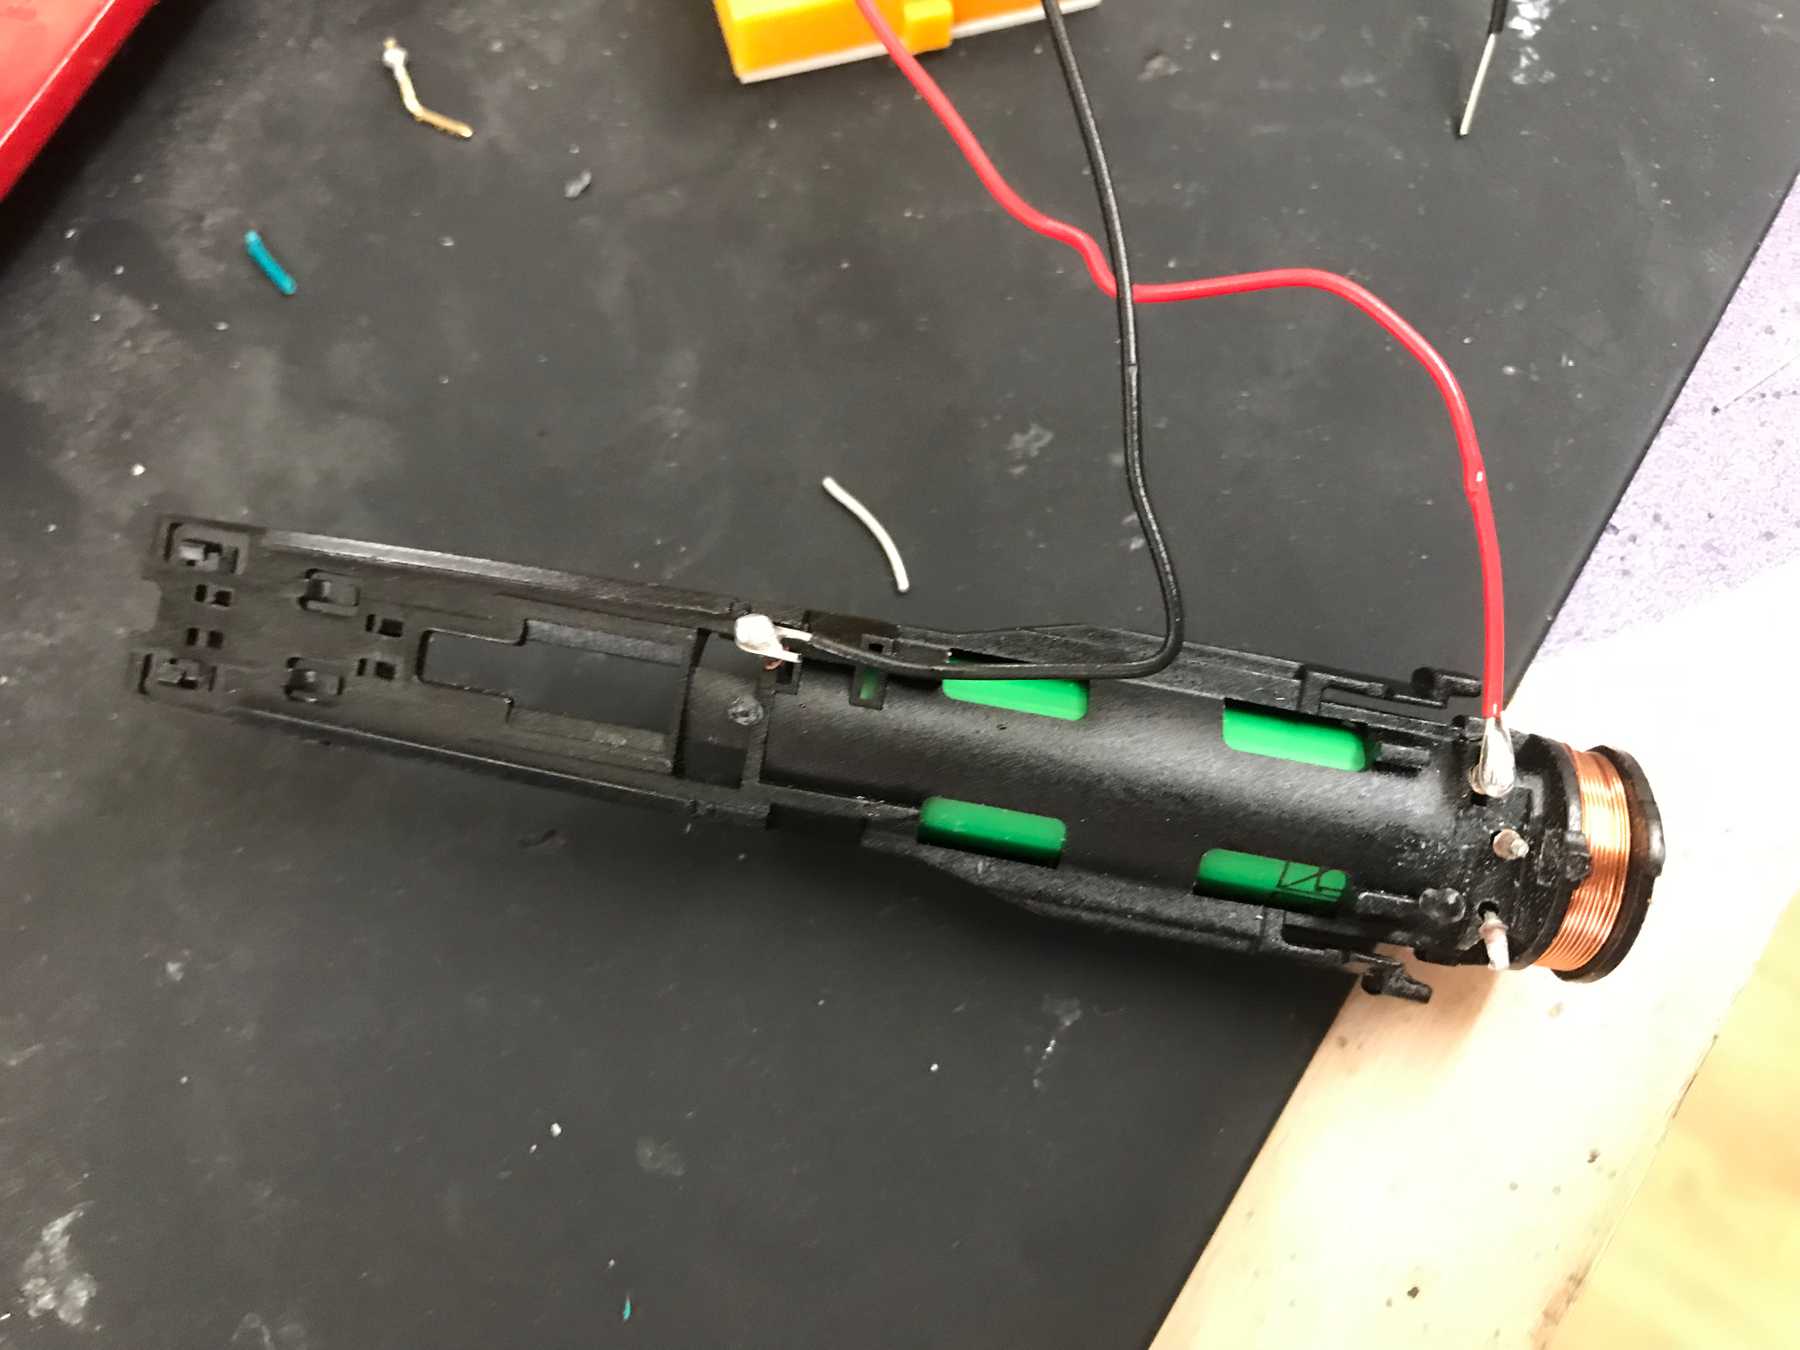 The salvaged battery holder